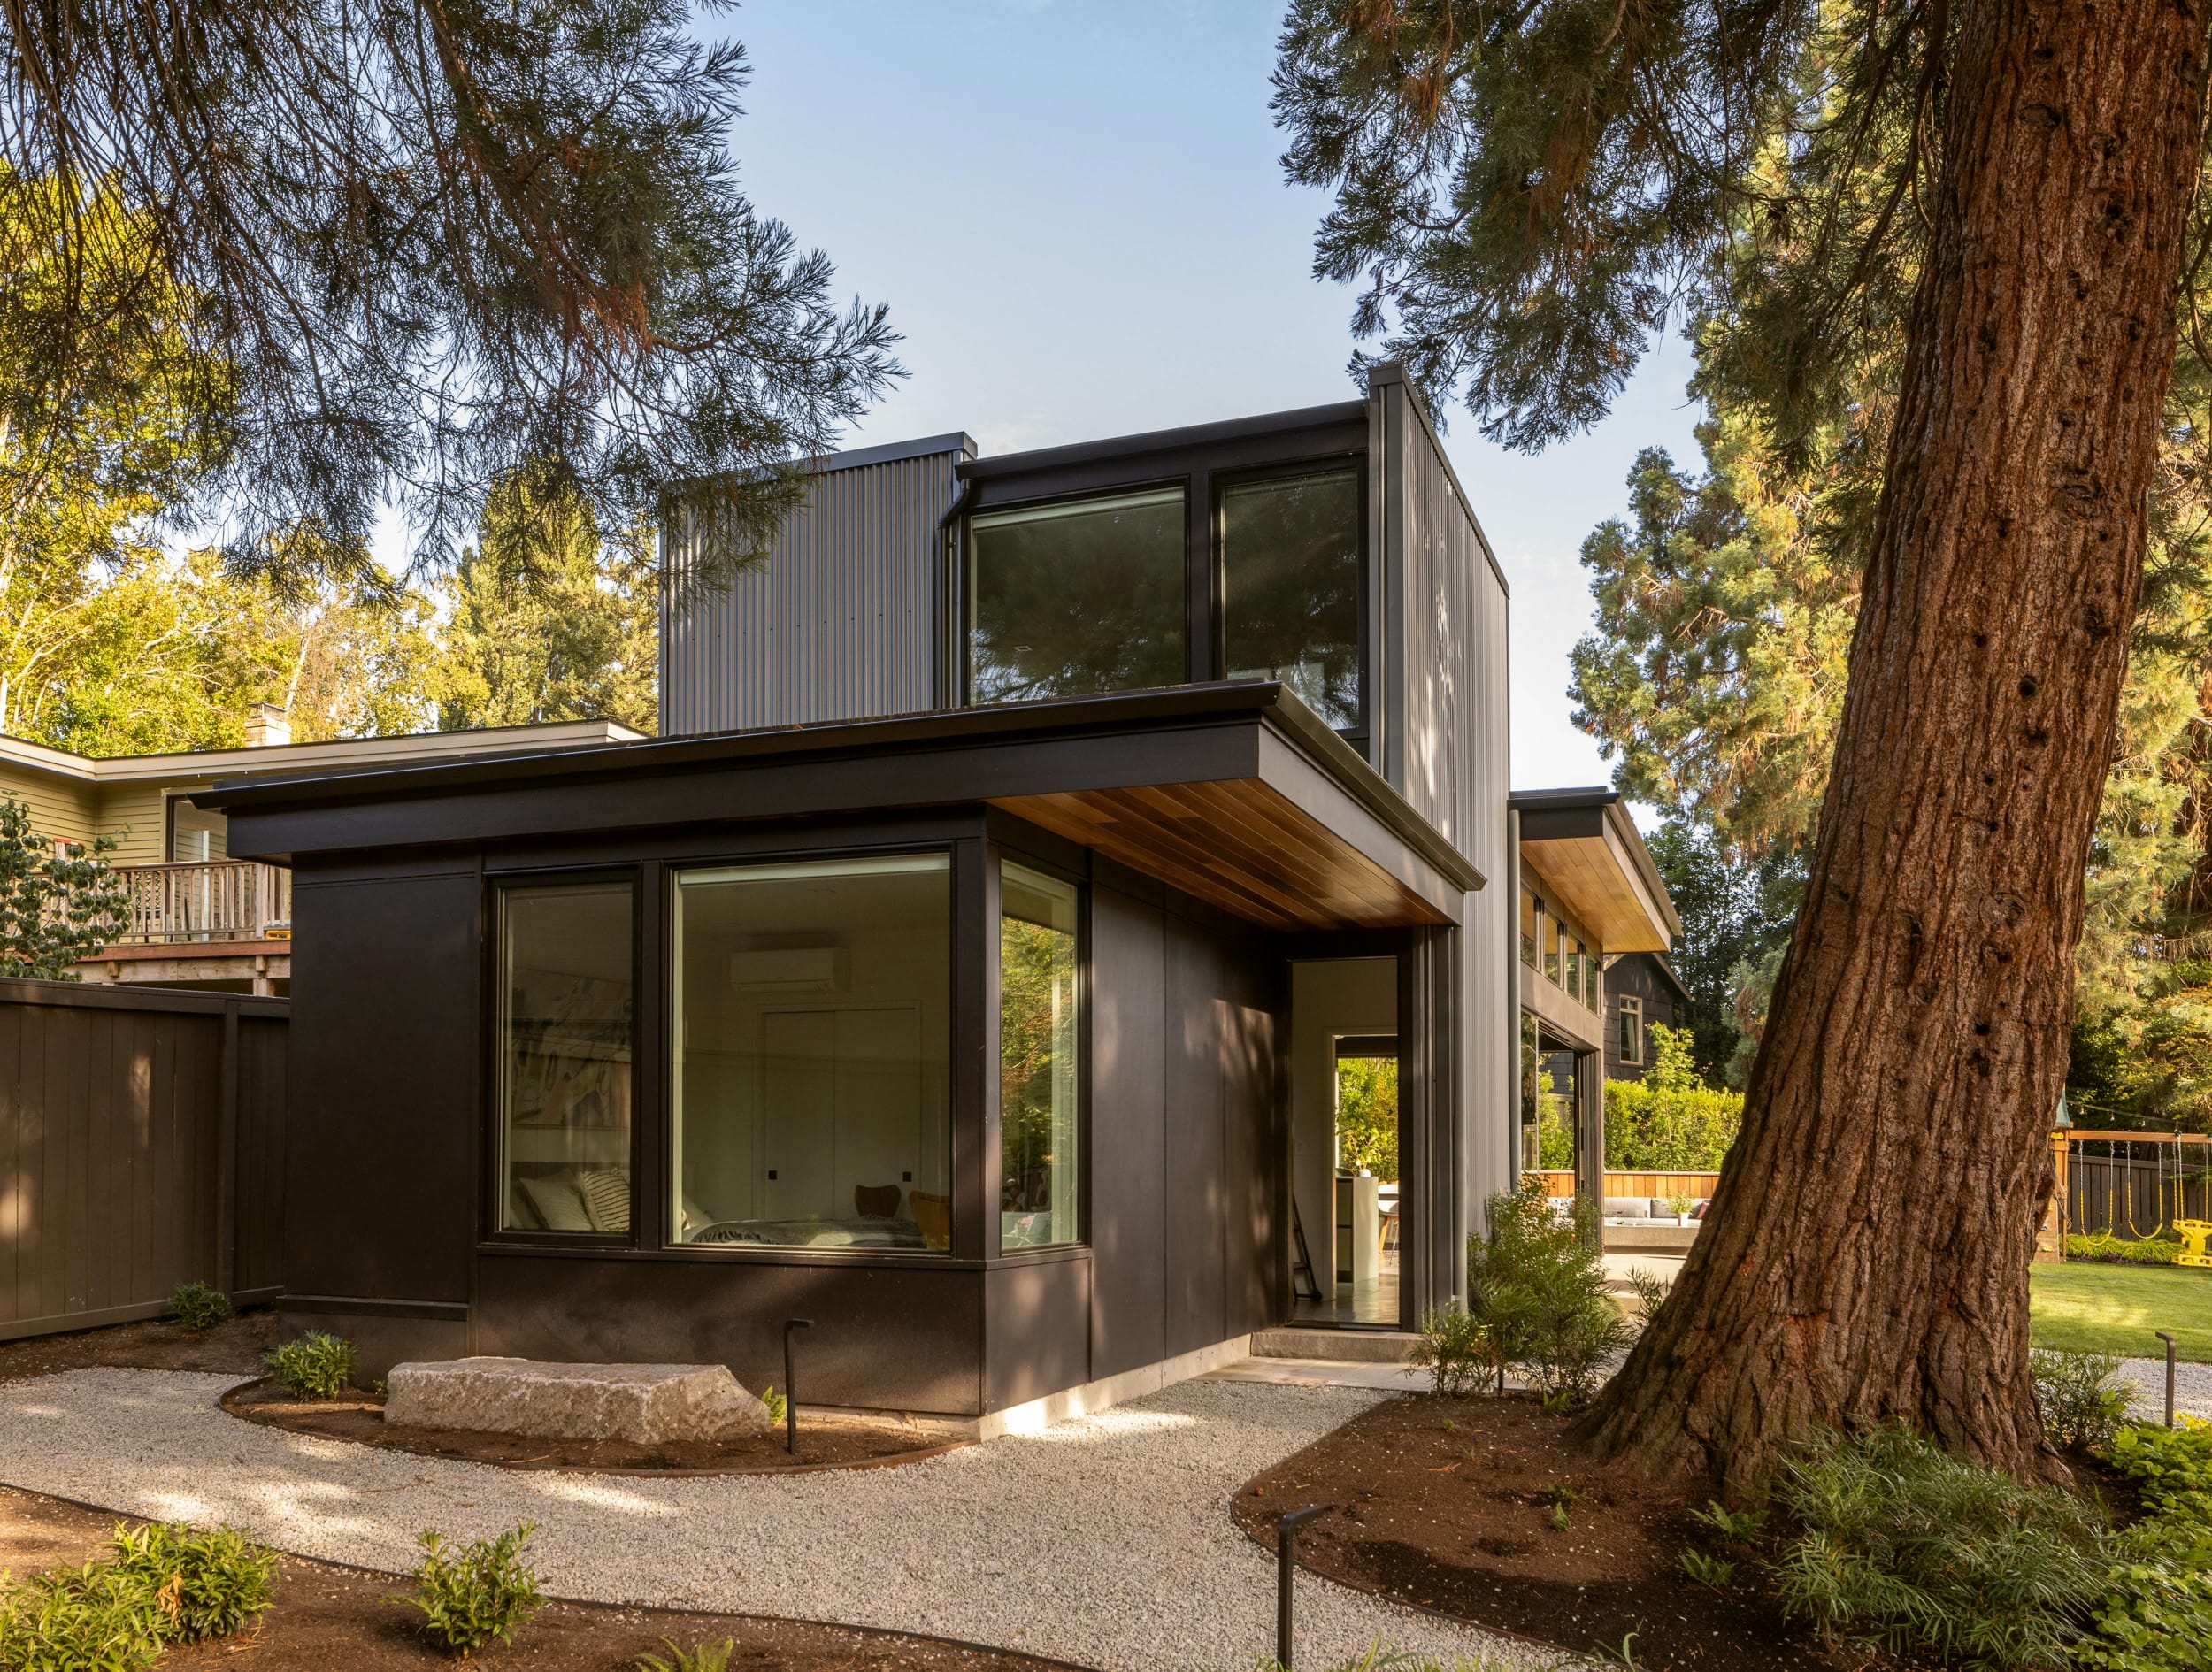 A carpenter-built modern home nestled in the woods, surrounded by trees.